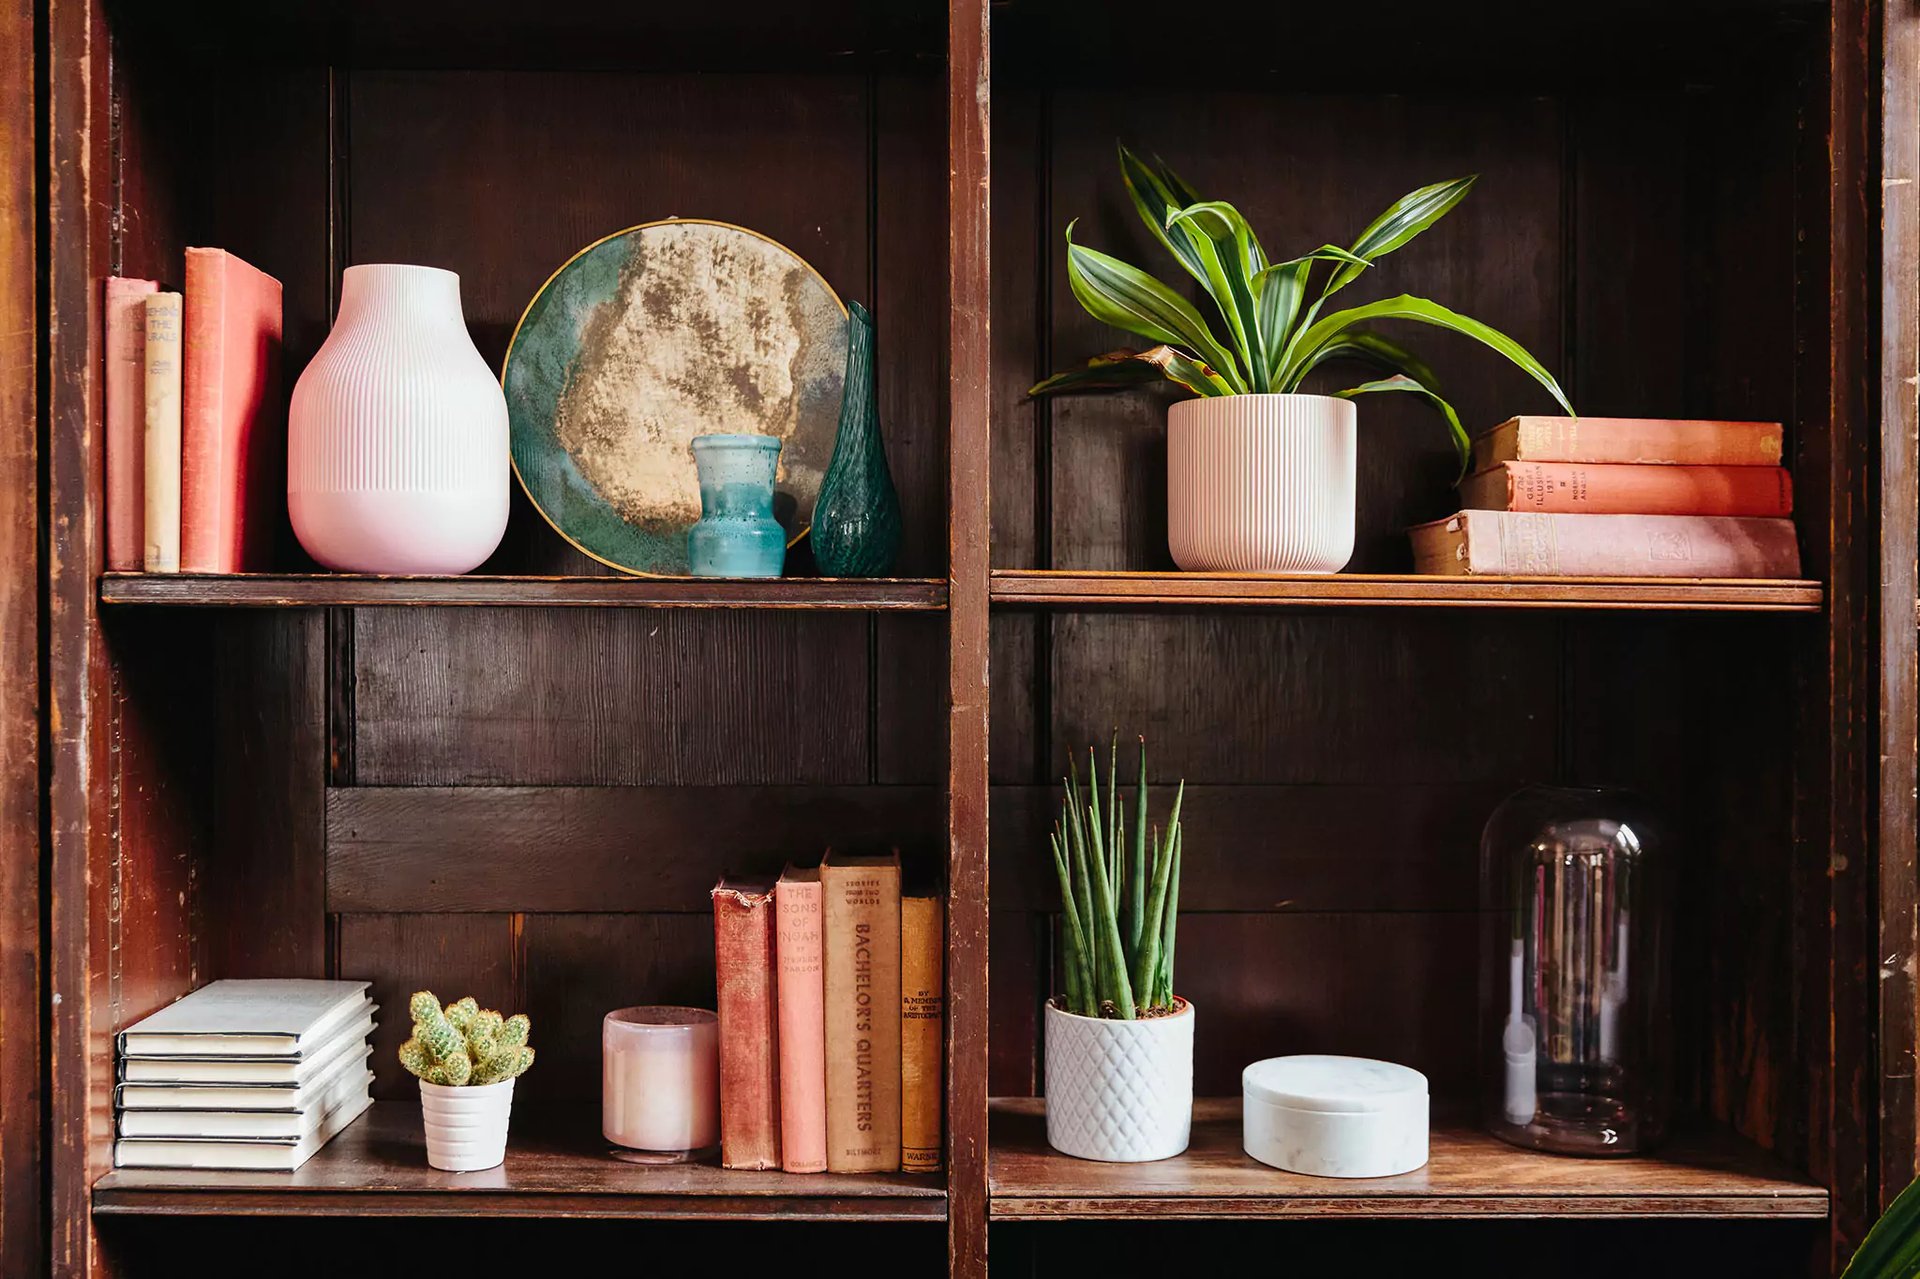 How to style shelves | Shelf with books and house plants